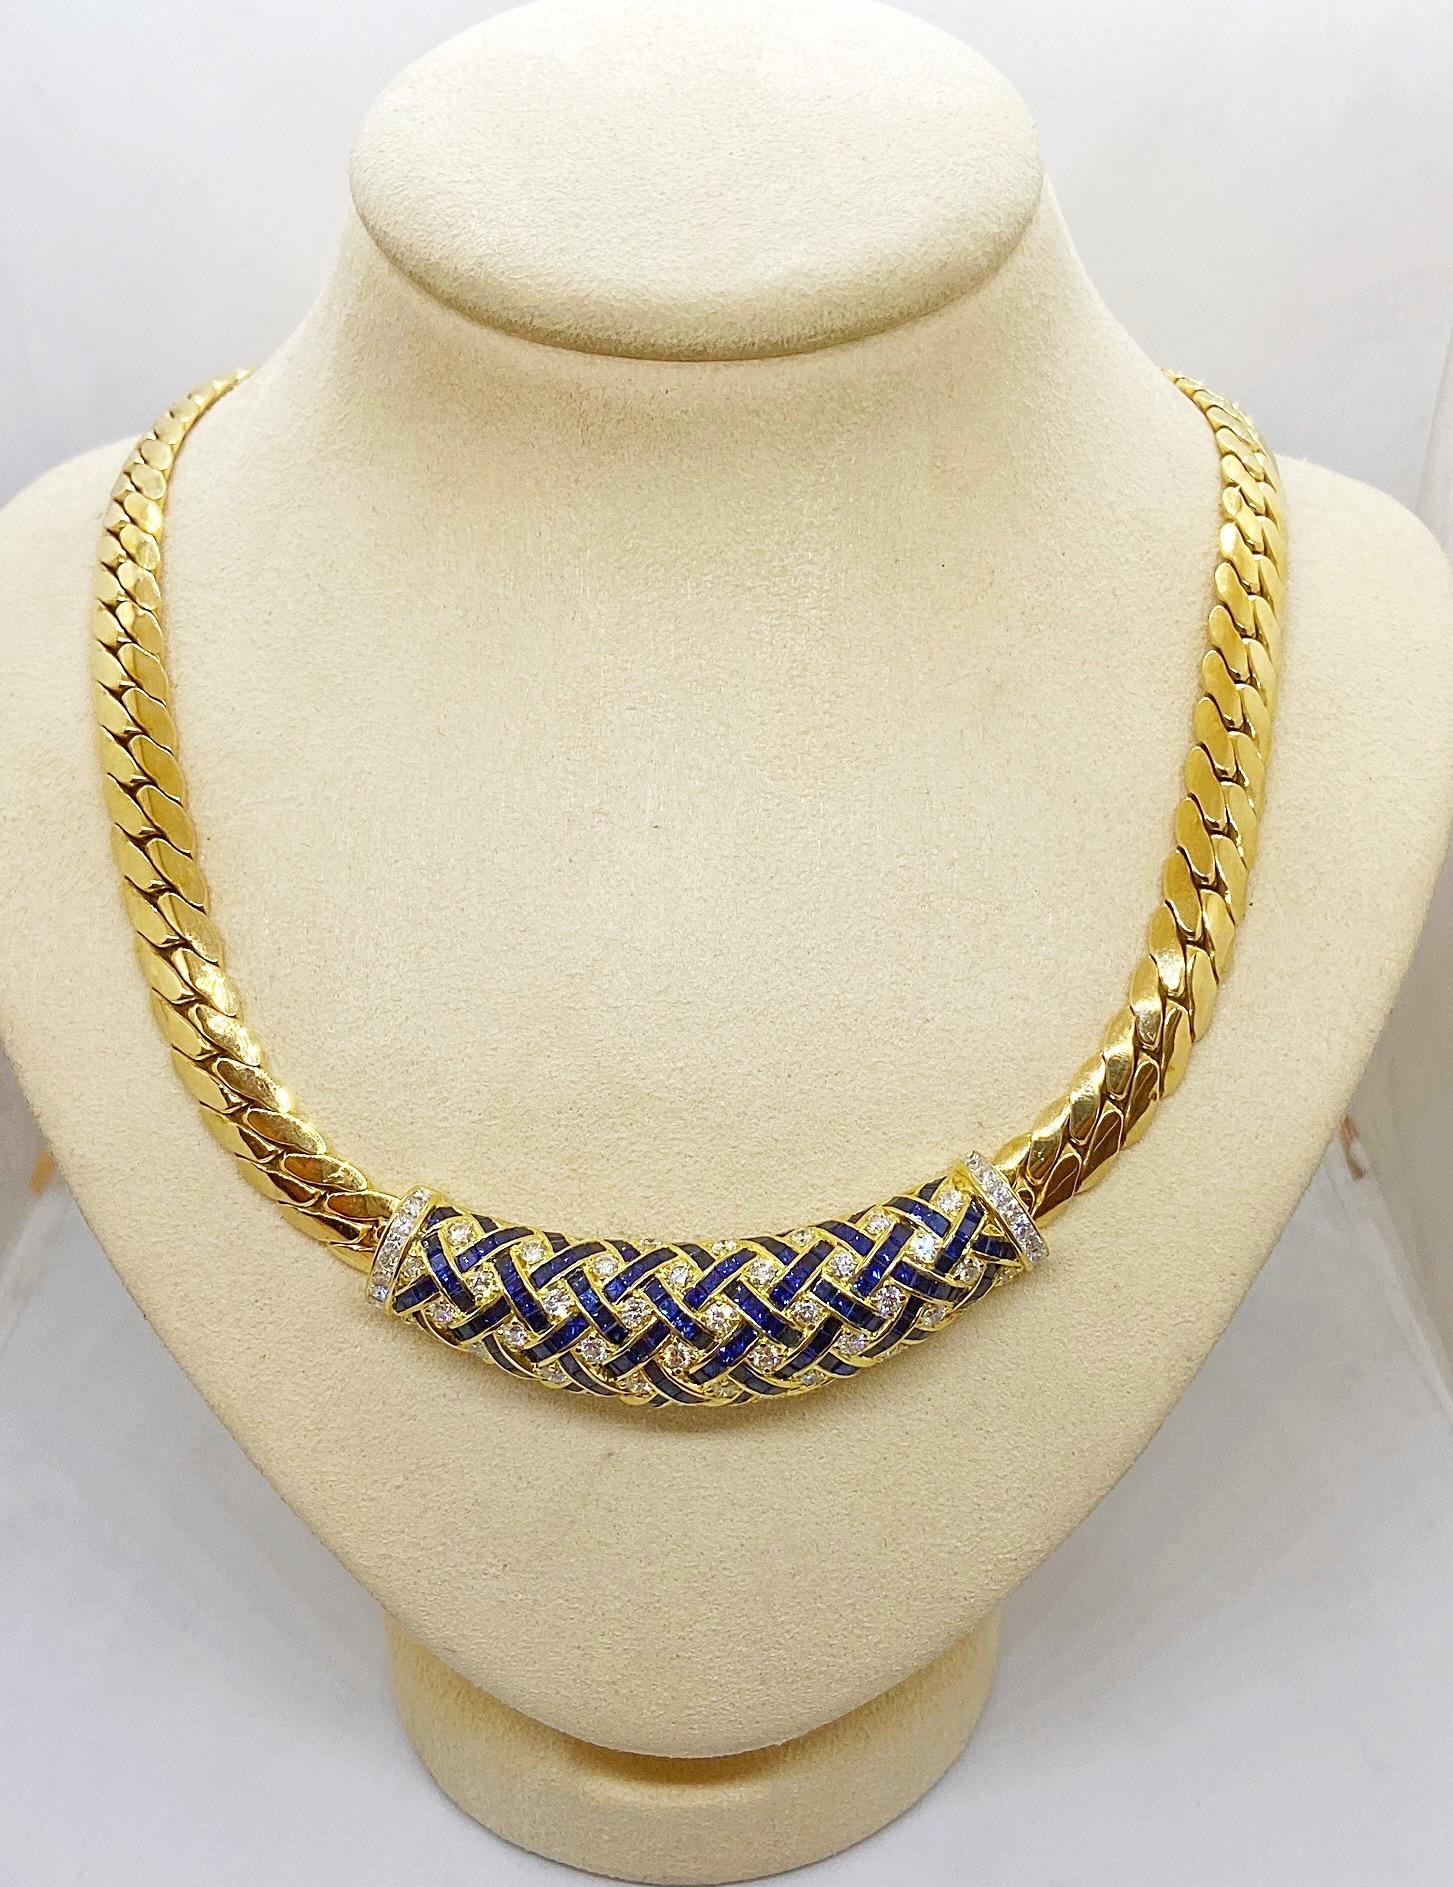 Round Cut 18 Karat Gold Necklace with Basket Weave Diamonds and Blue Sapphires Center For Sale